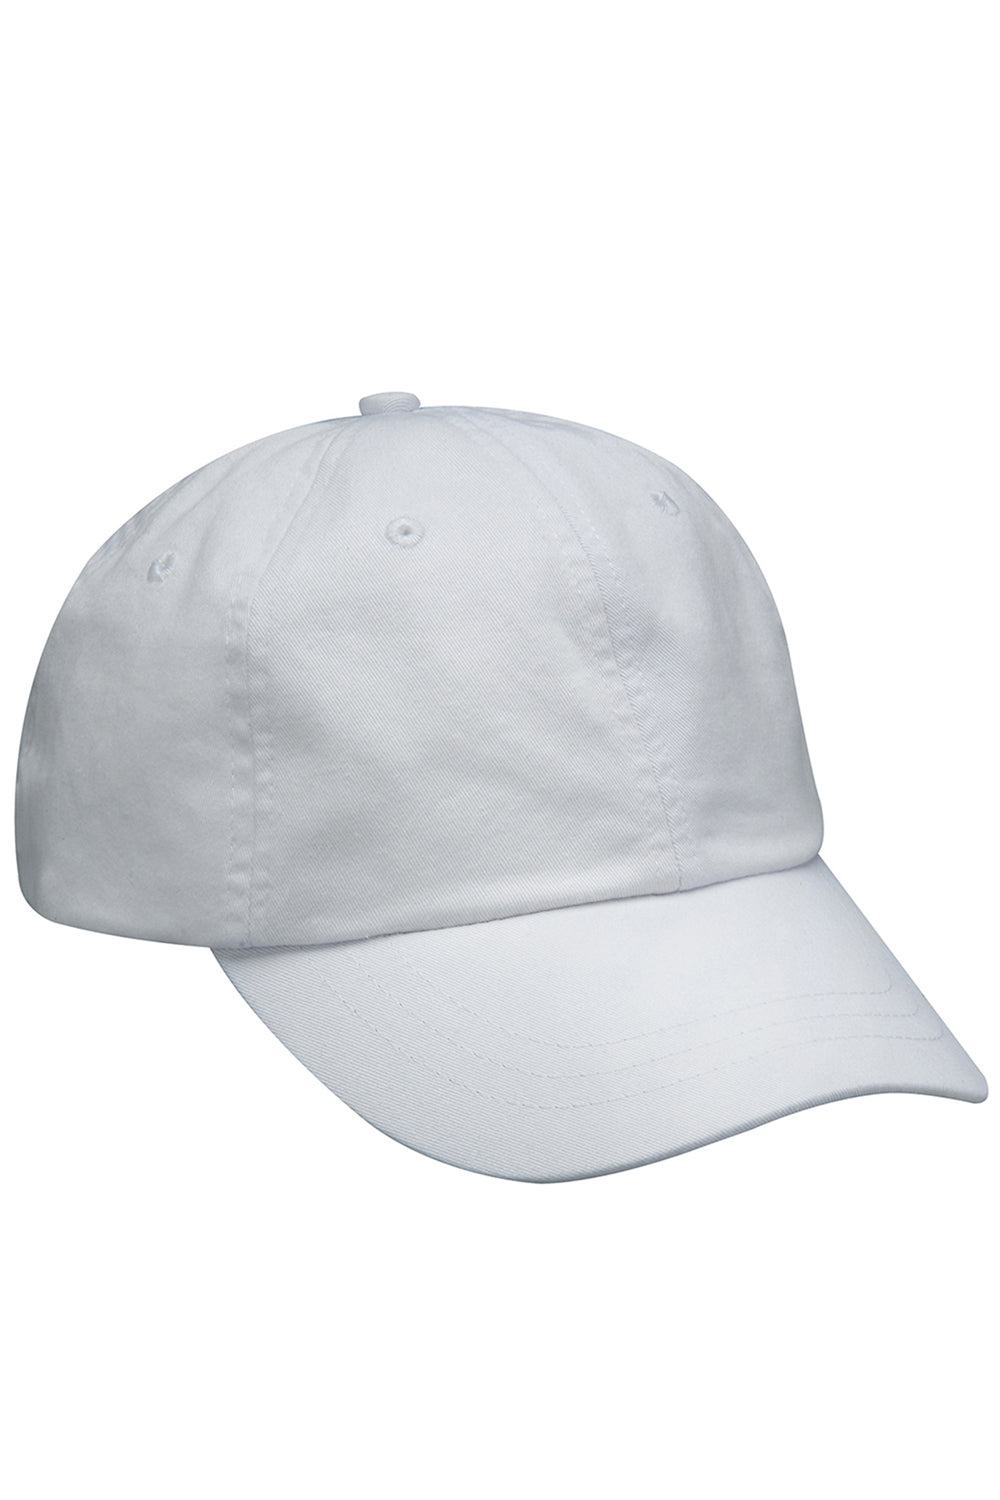 Adams AD969 Mens Adjustable Hat White Flat Front